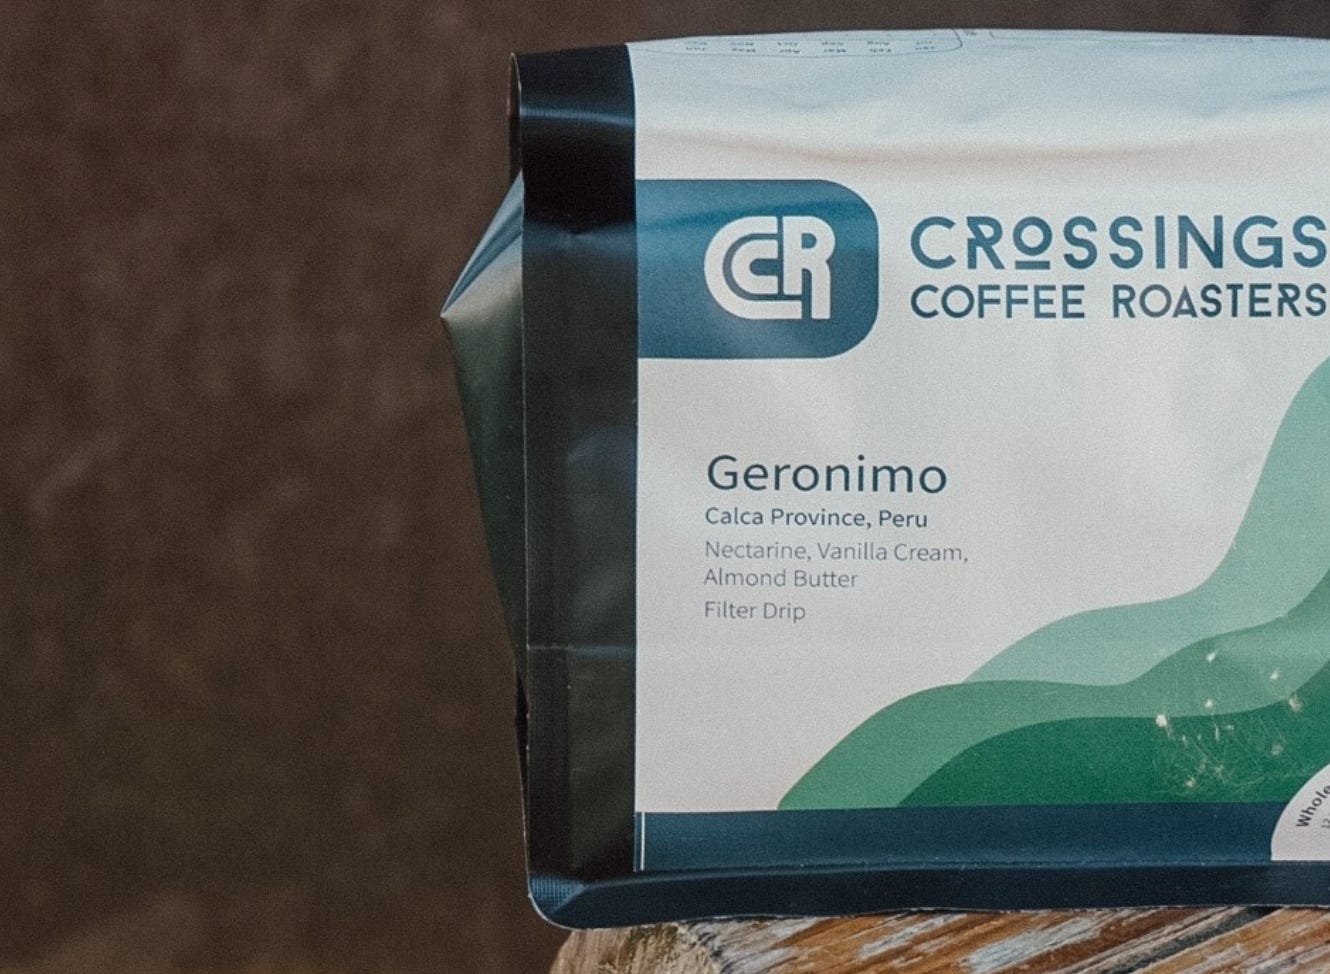 A close up of a black coffee bag with a white label featuring the Crossings Coffee Roasters typographic logo.